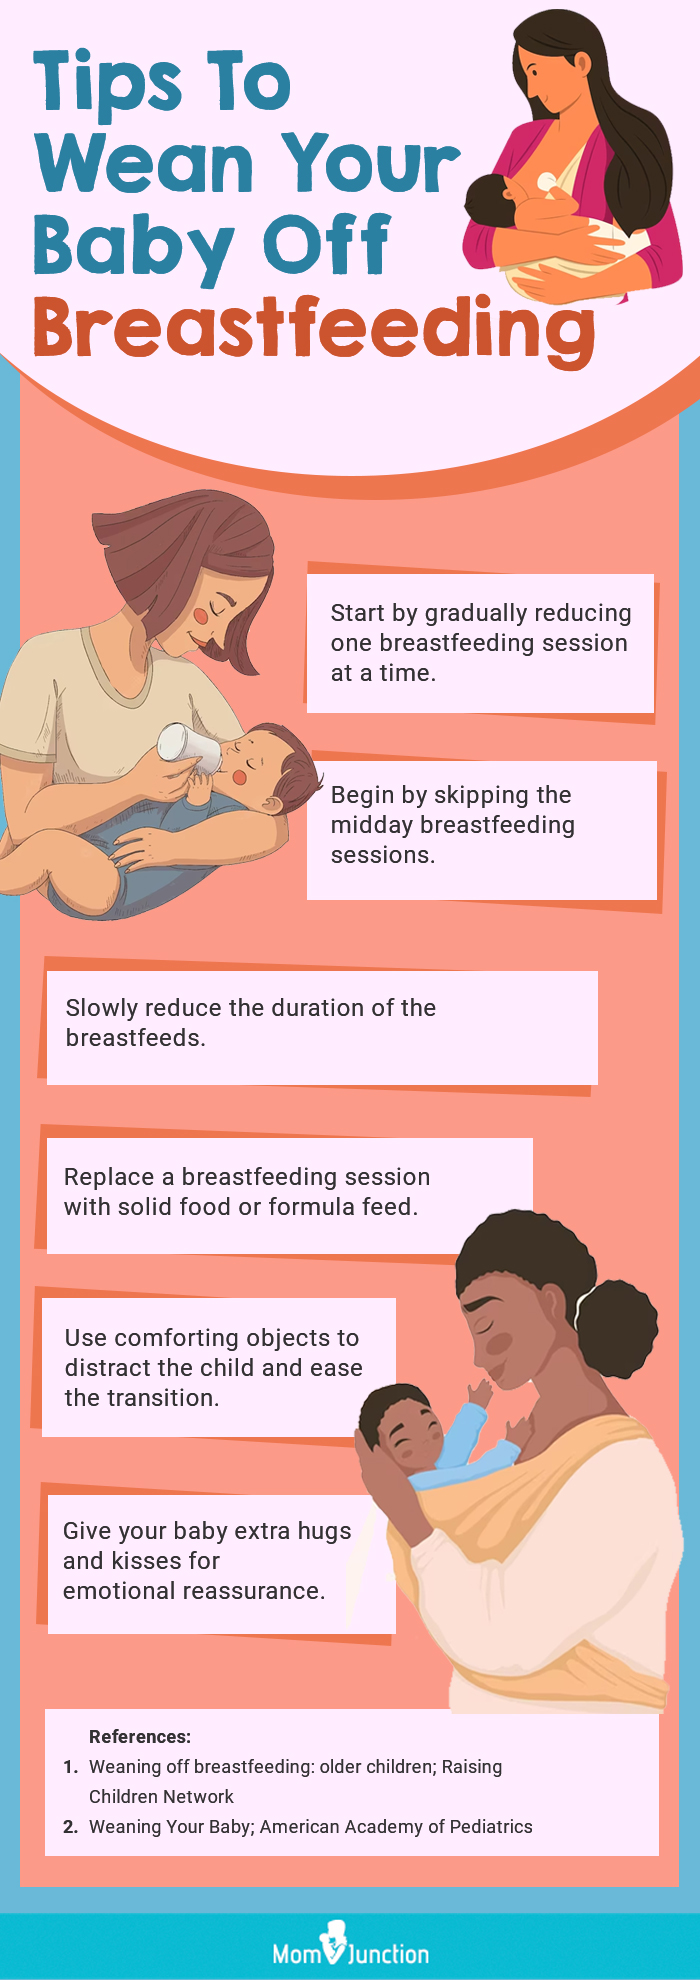 Tips To Wean Your Baby Off Breastfeeding (infographic)